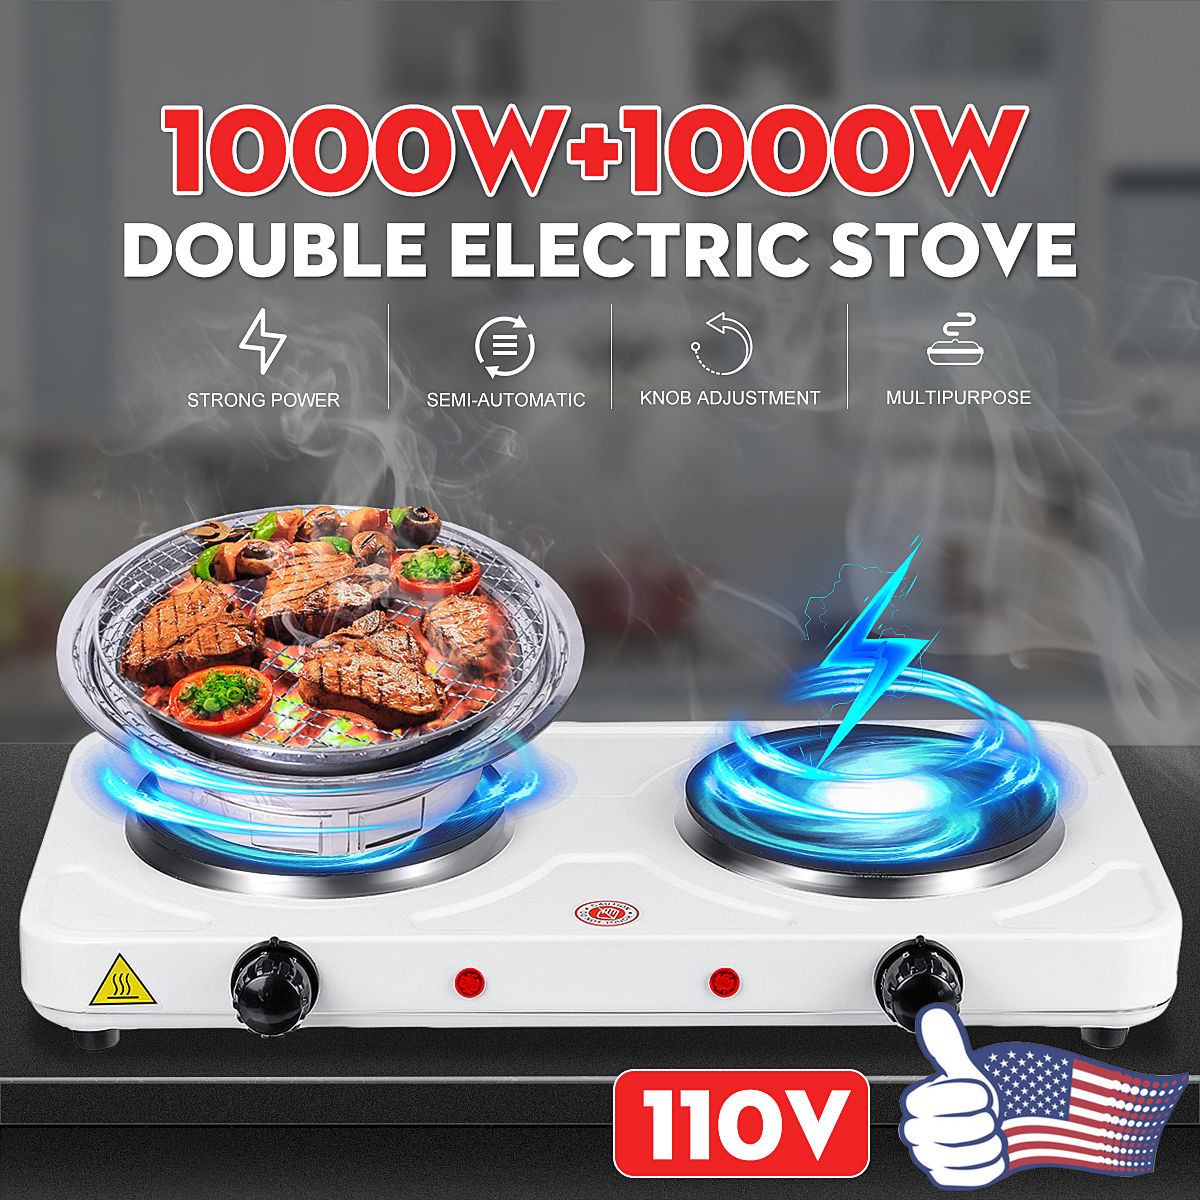 110V-2000W-Portable-Double-Electric-Stove-Burner-Hot-Plate-Cooking-Heater-1730241-1